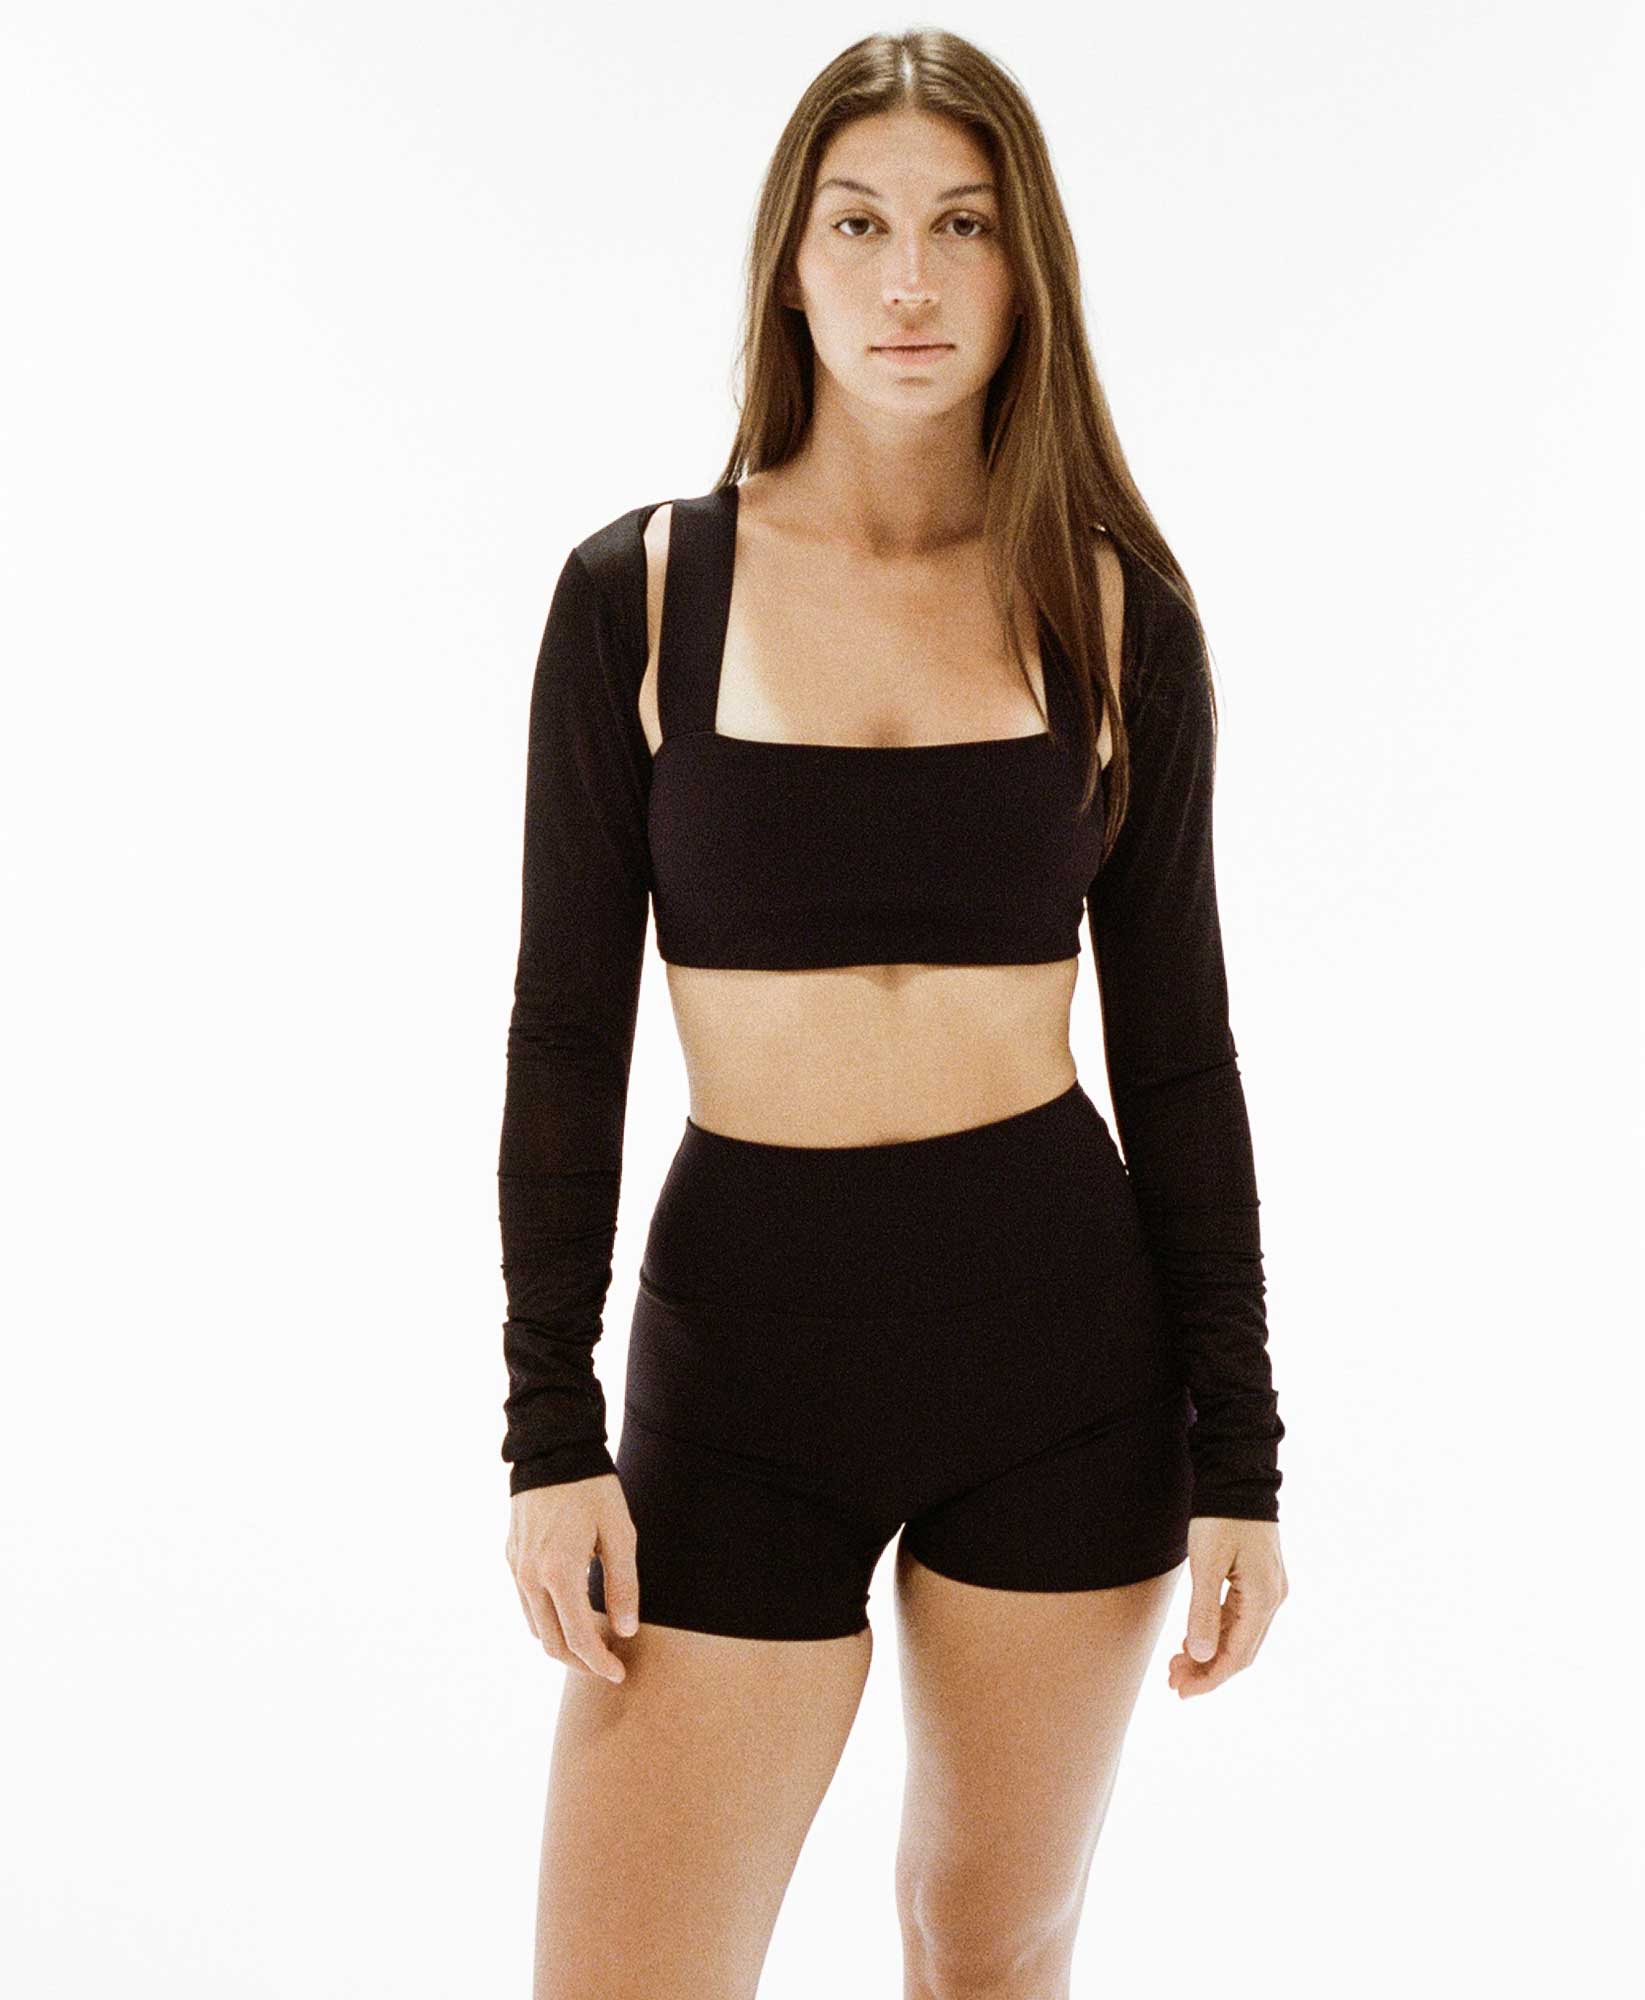 Wear One's At The Scrunch Shrug in Goji Black on model cropped front view